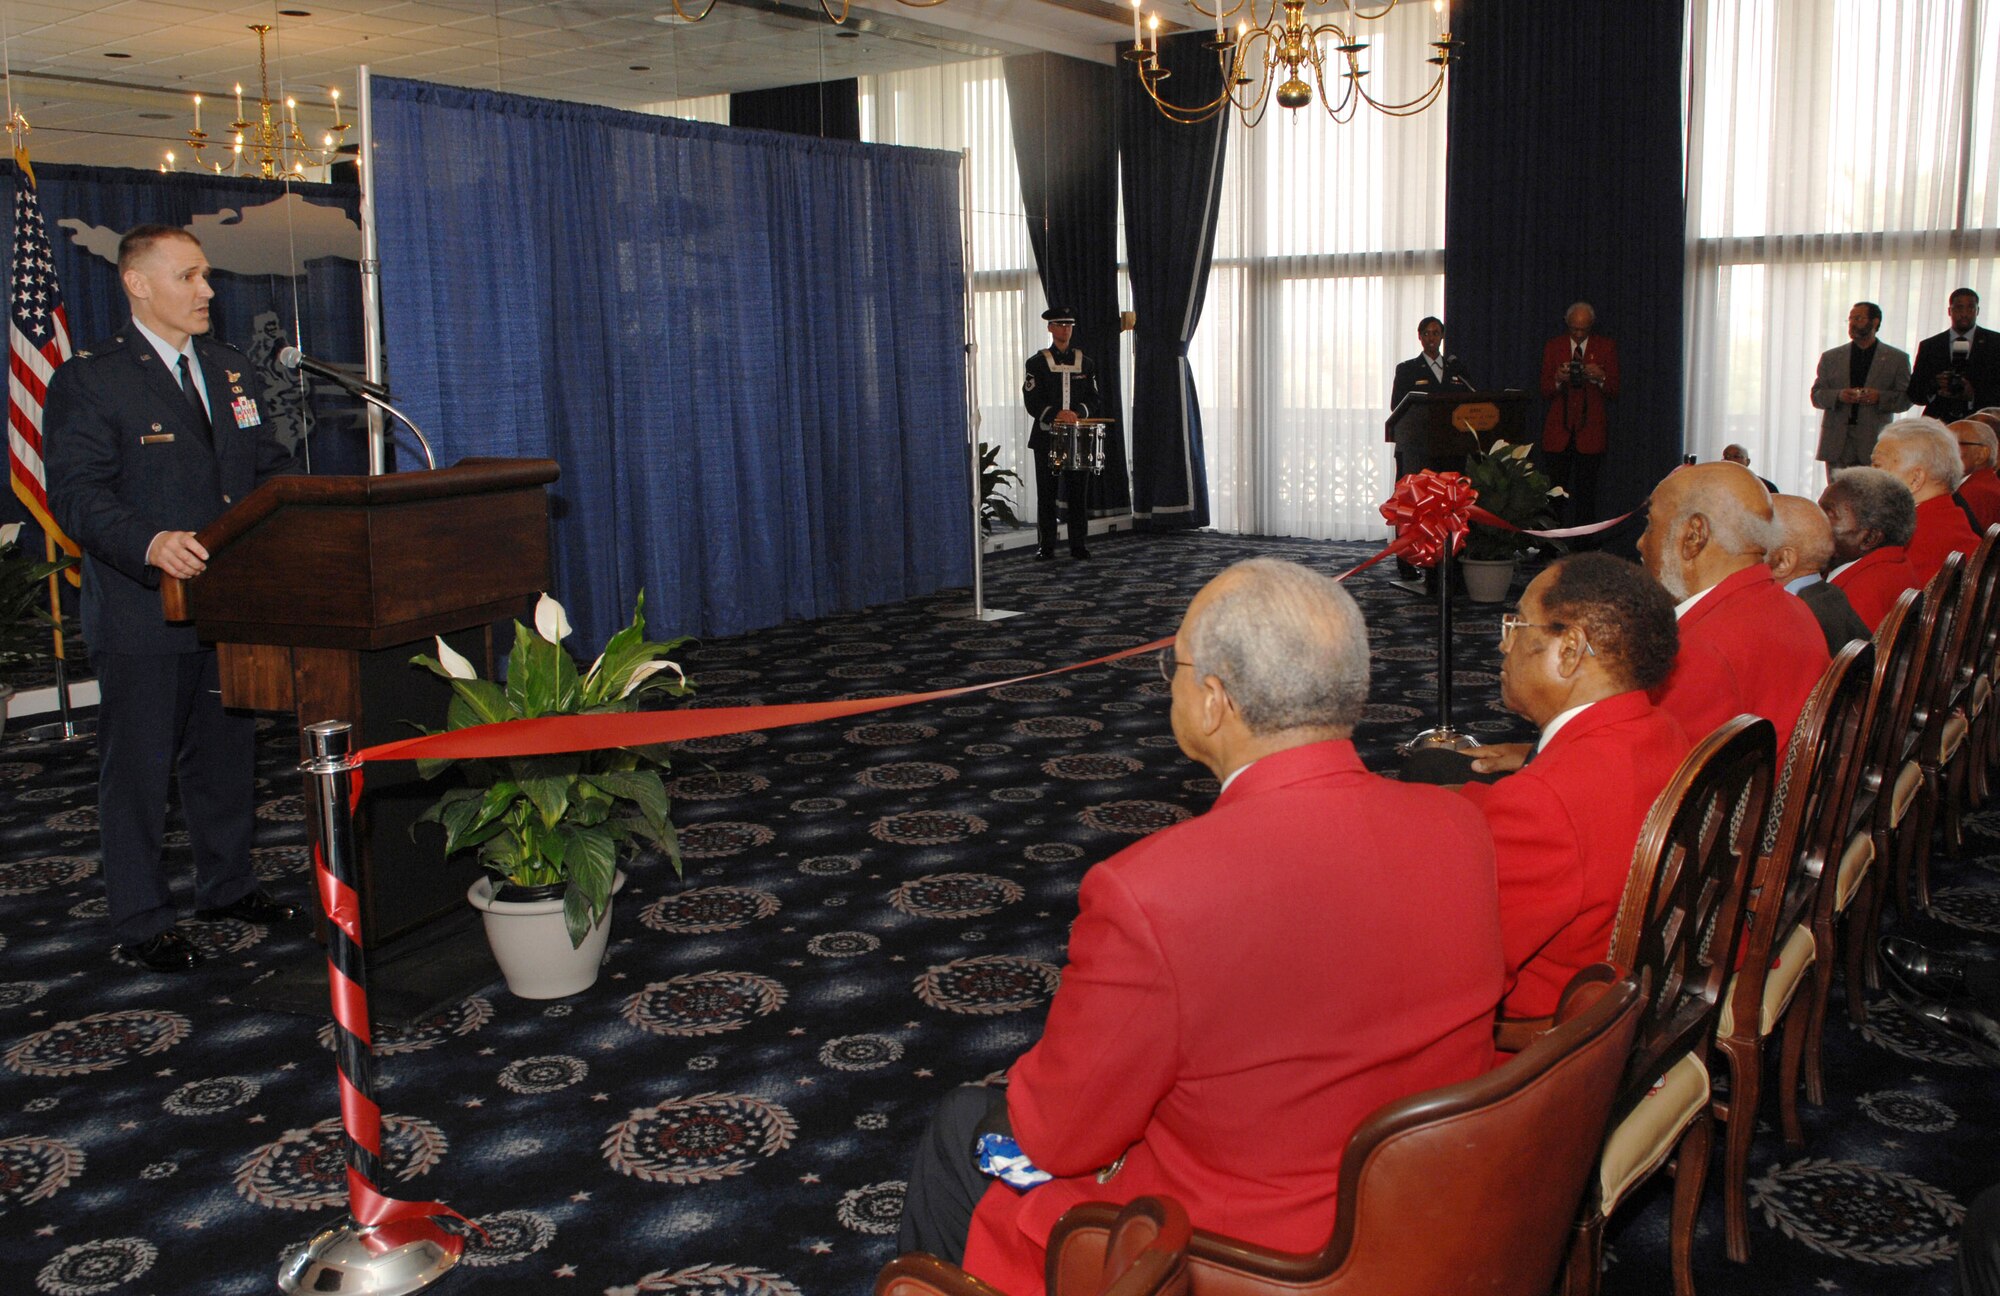 Col. Kurt Neubauer speaks to original members of the Tuskegee Airmen at the dedication ceremony March 28 of the "Tuskegee Room" at the Bolling Air Force Base Club in Washington D.C. The Tuskegee Airmen received the Congressional Gold Medal from President George W. Bush March 29, the highest civilian honor bestowed by Congress. Colonel Neubauer is commander of the 11th Wing. (U.S. Air Force photo/Airman 1st Class Timothy Chacon)